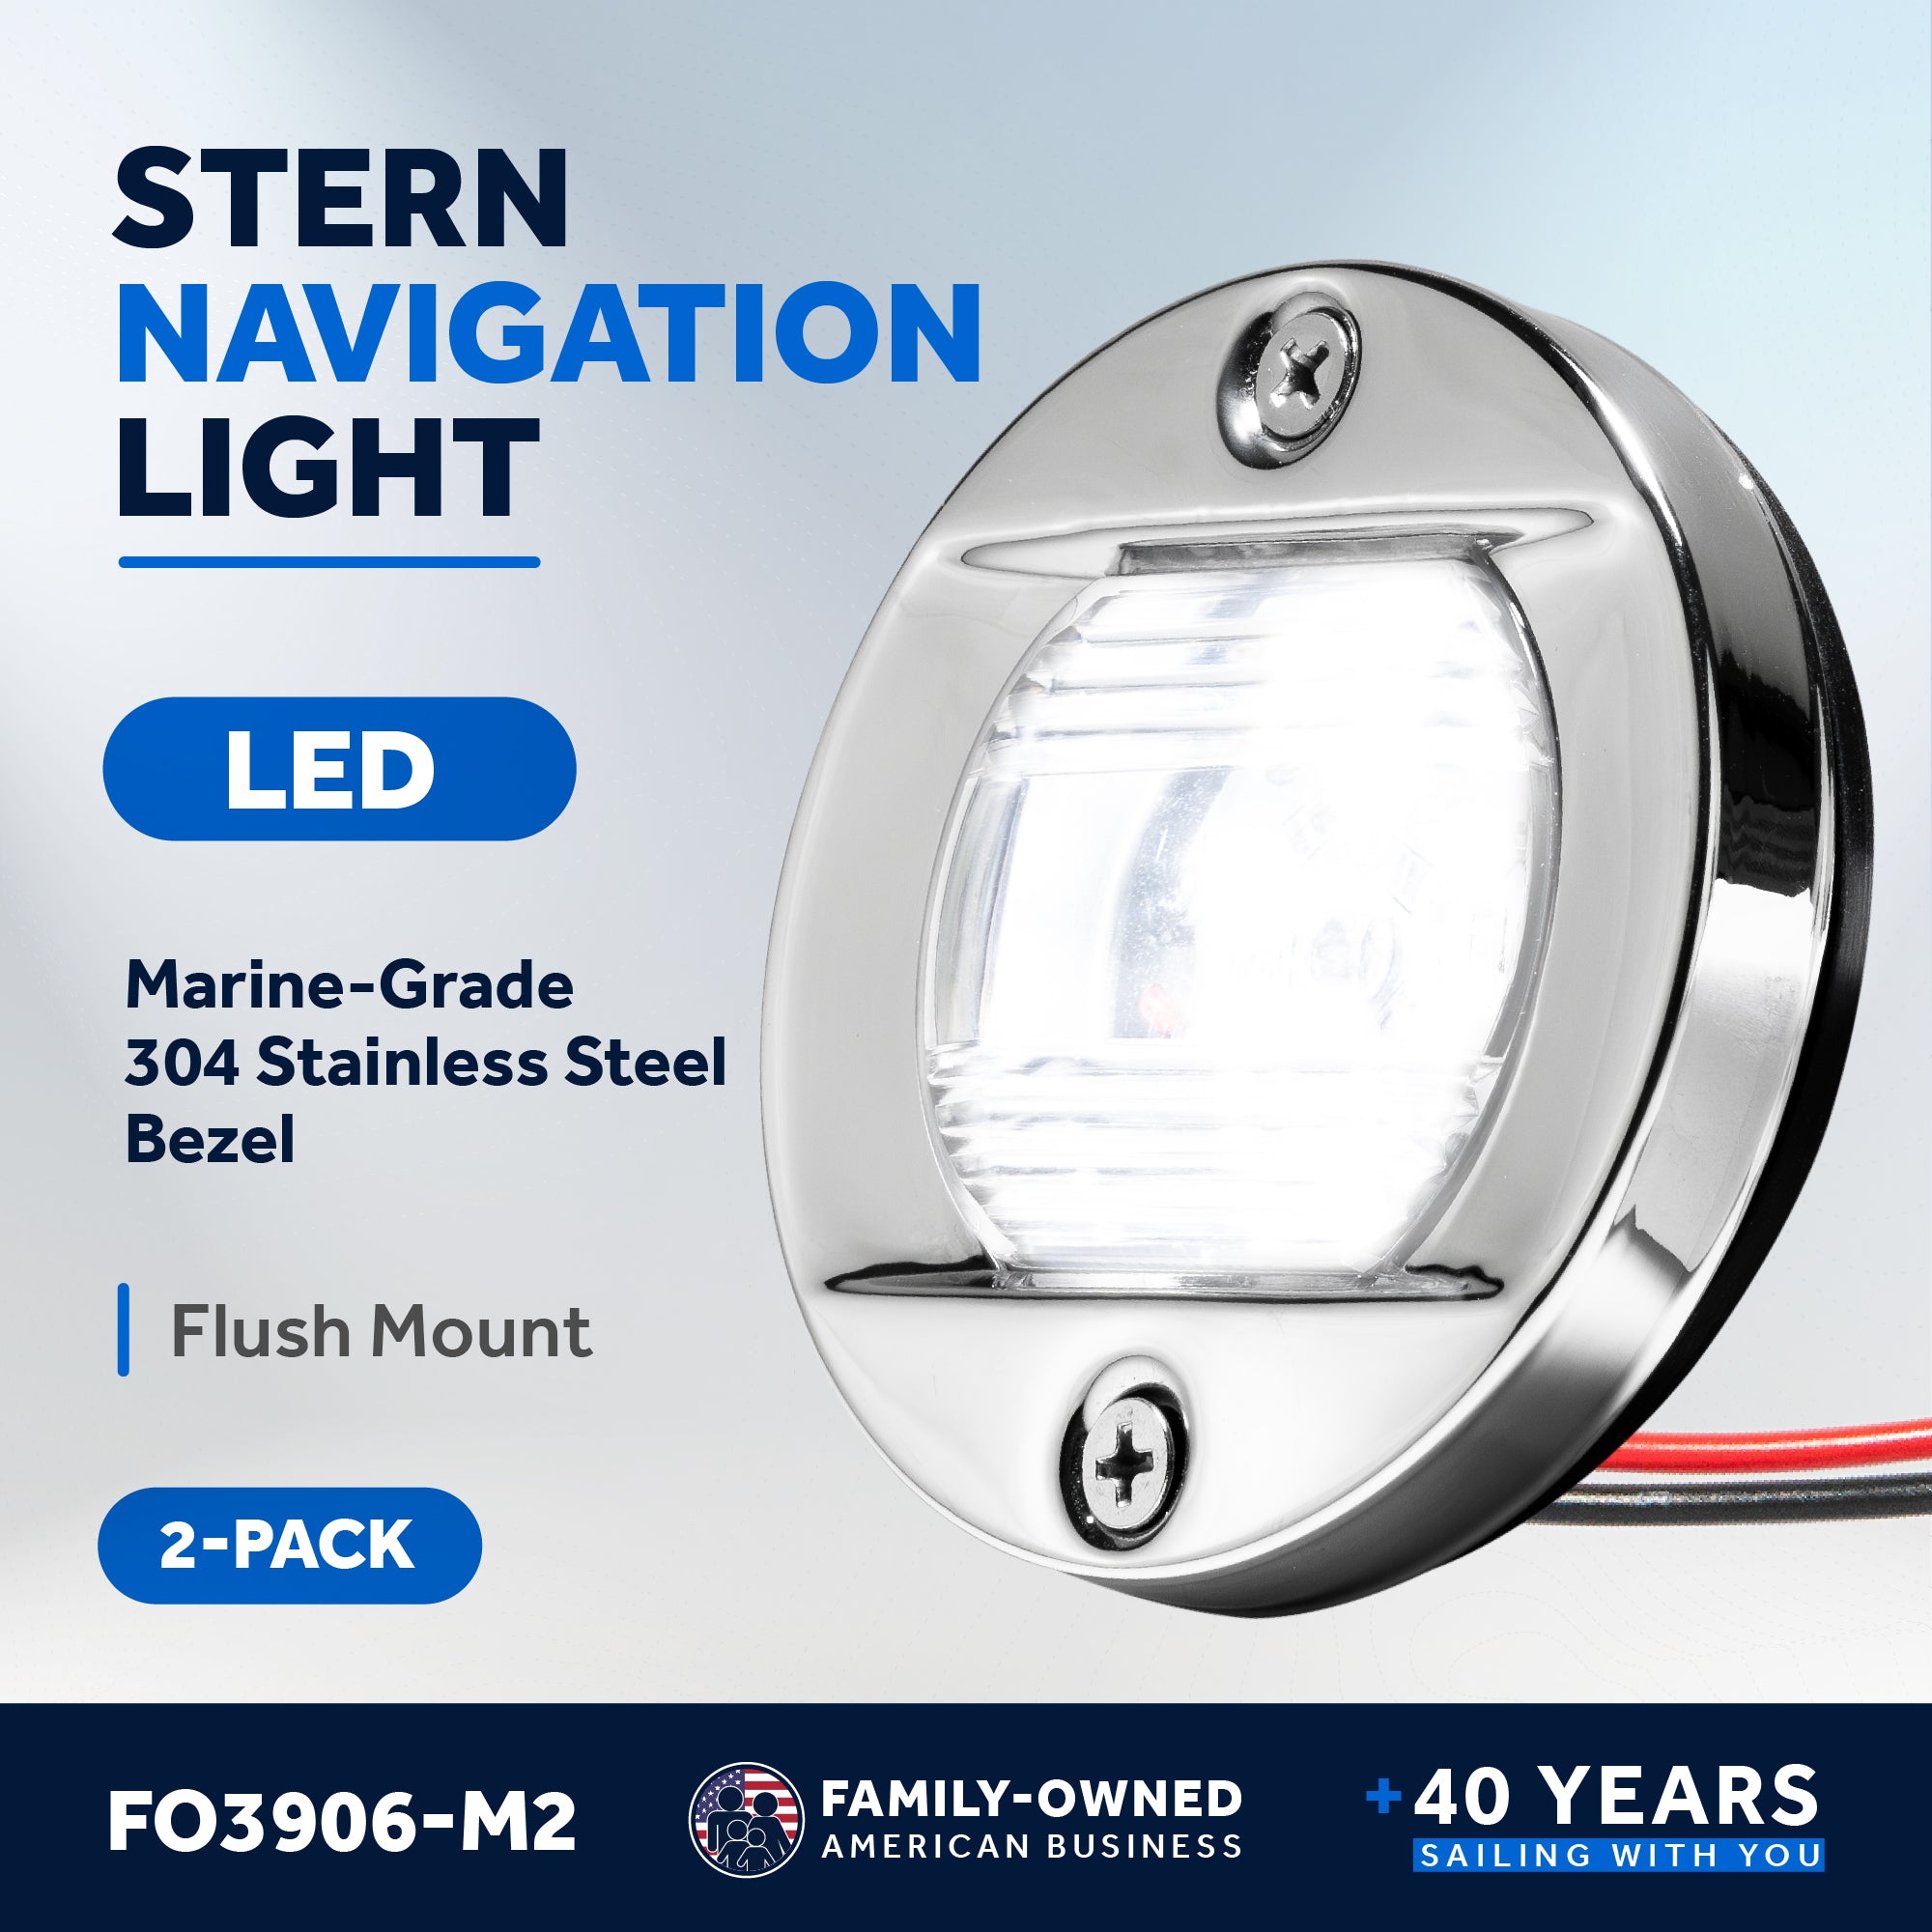 LED Courtesy Navigation Lights, Round Stainless Steel, Daylight, 2-Pack - FO3906-M2